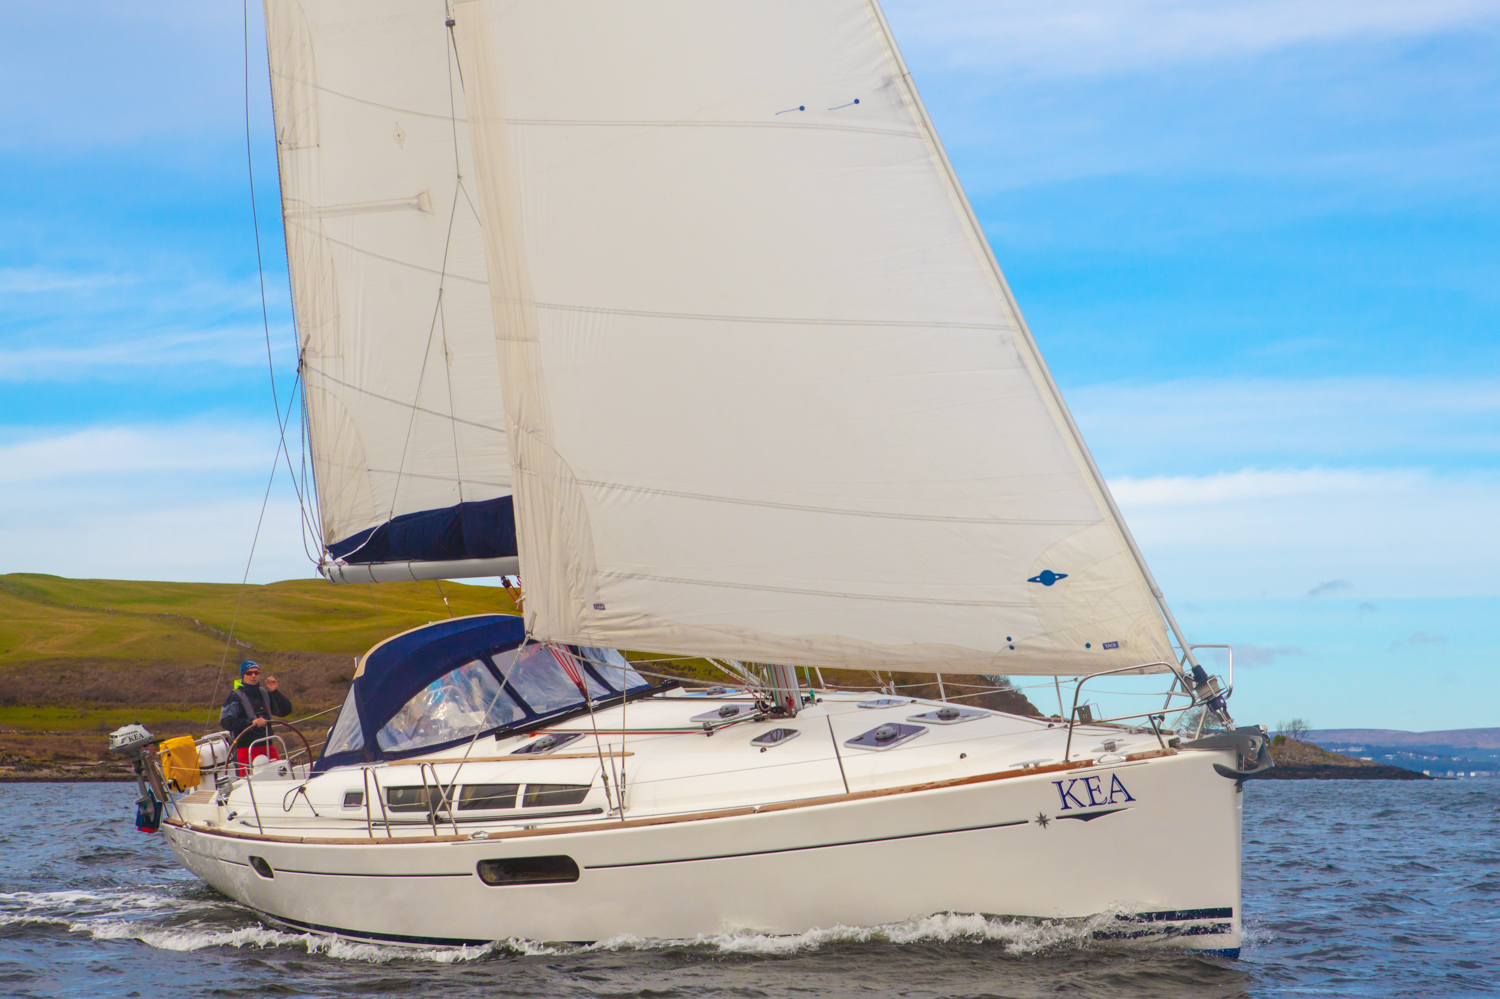 jeanneau sun odyssey 42i - Yacht Charter Largs & Boat hire in United Kingdom Scotland Firth of Clyde Largs Largs Yacht Haven 3